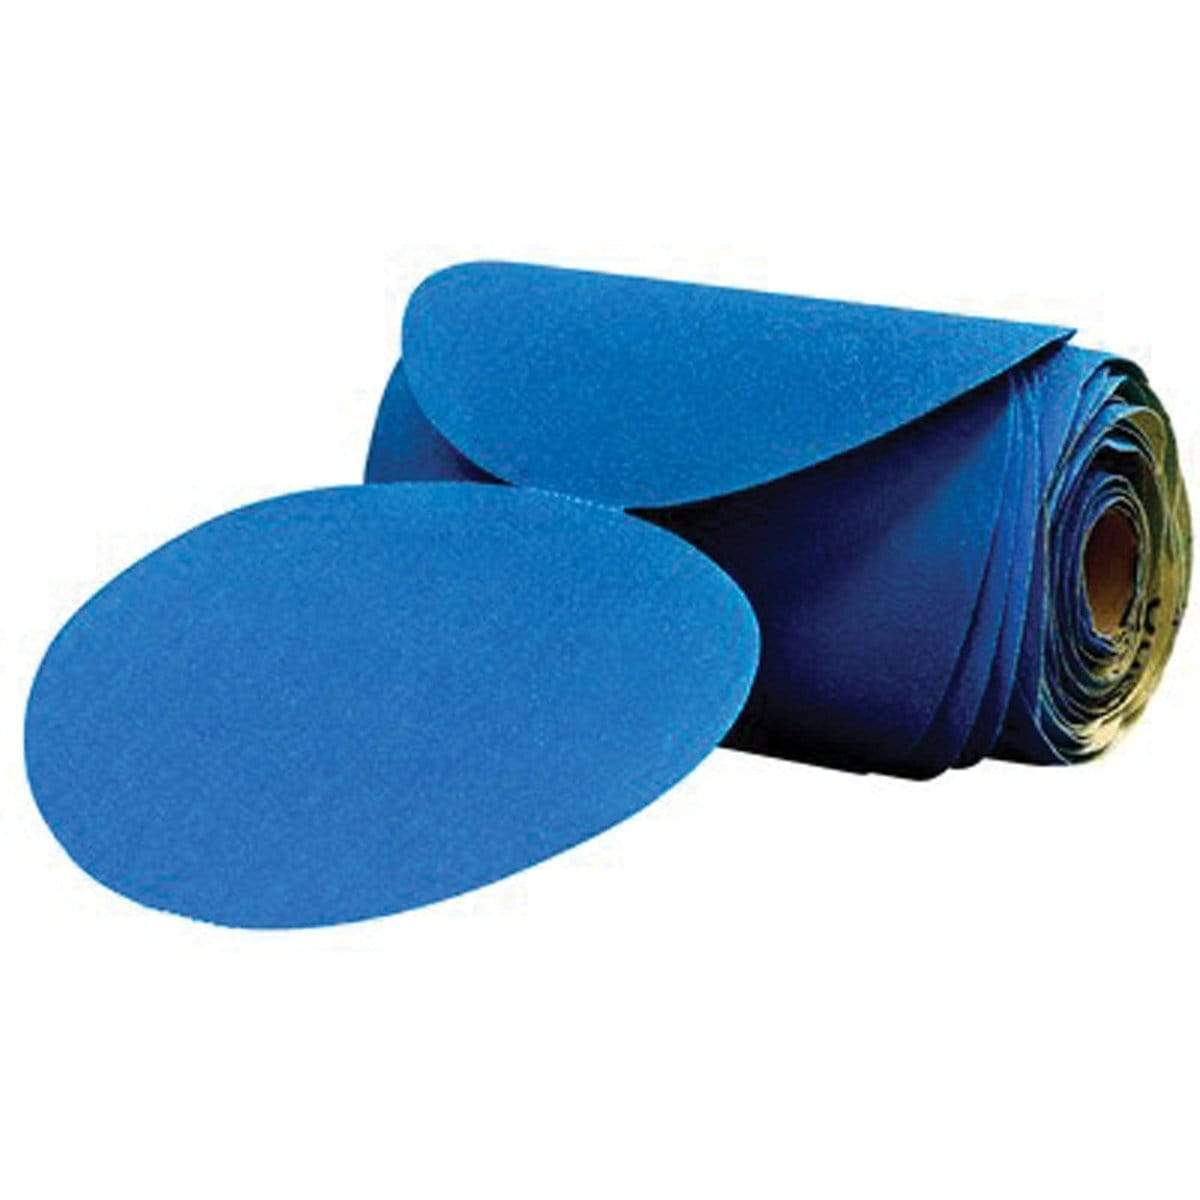 3M Marine Qualifies for Free Shipping 3M Stikit Blue Sandpaper 6" Disc 40 25/Roll #36200